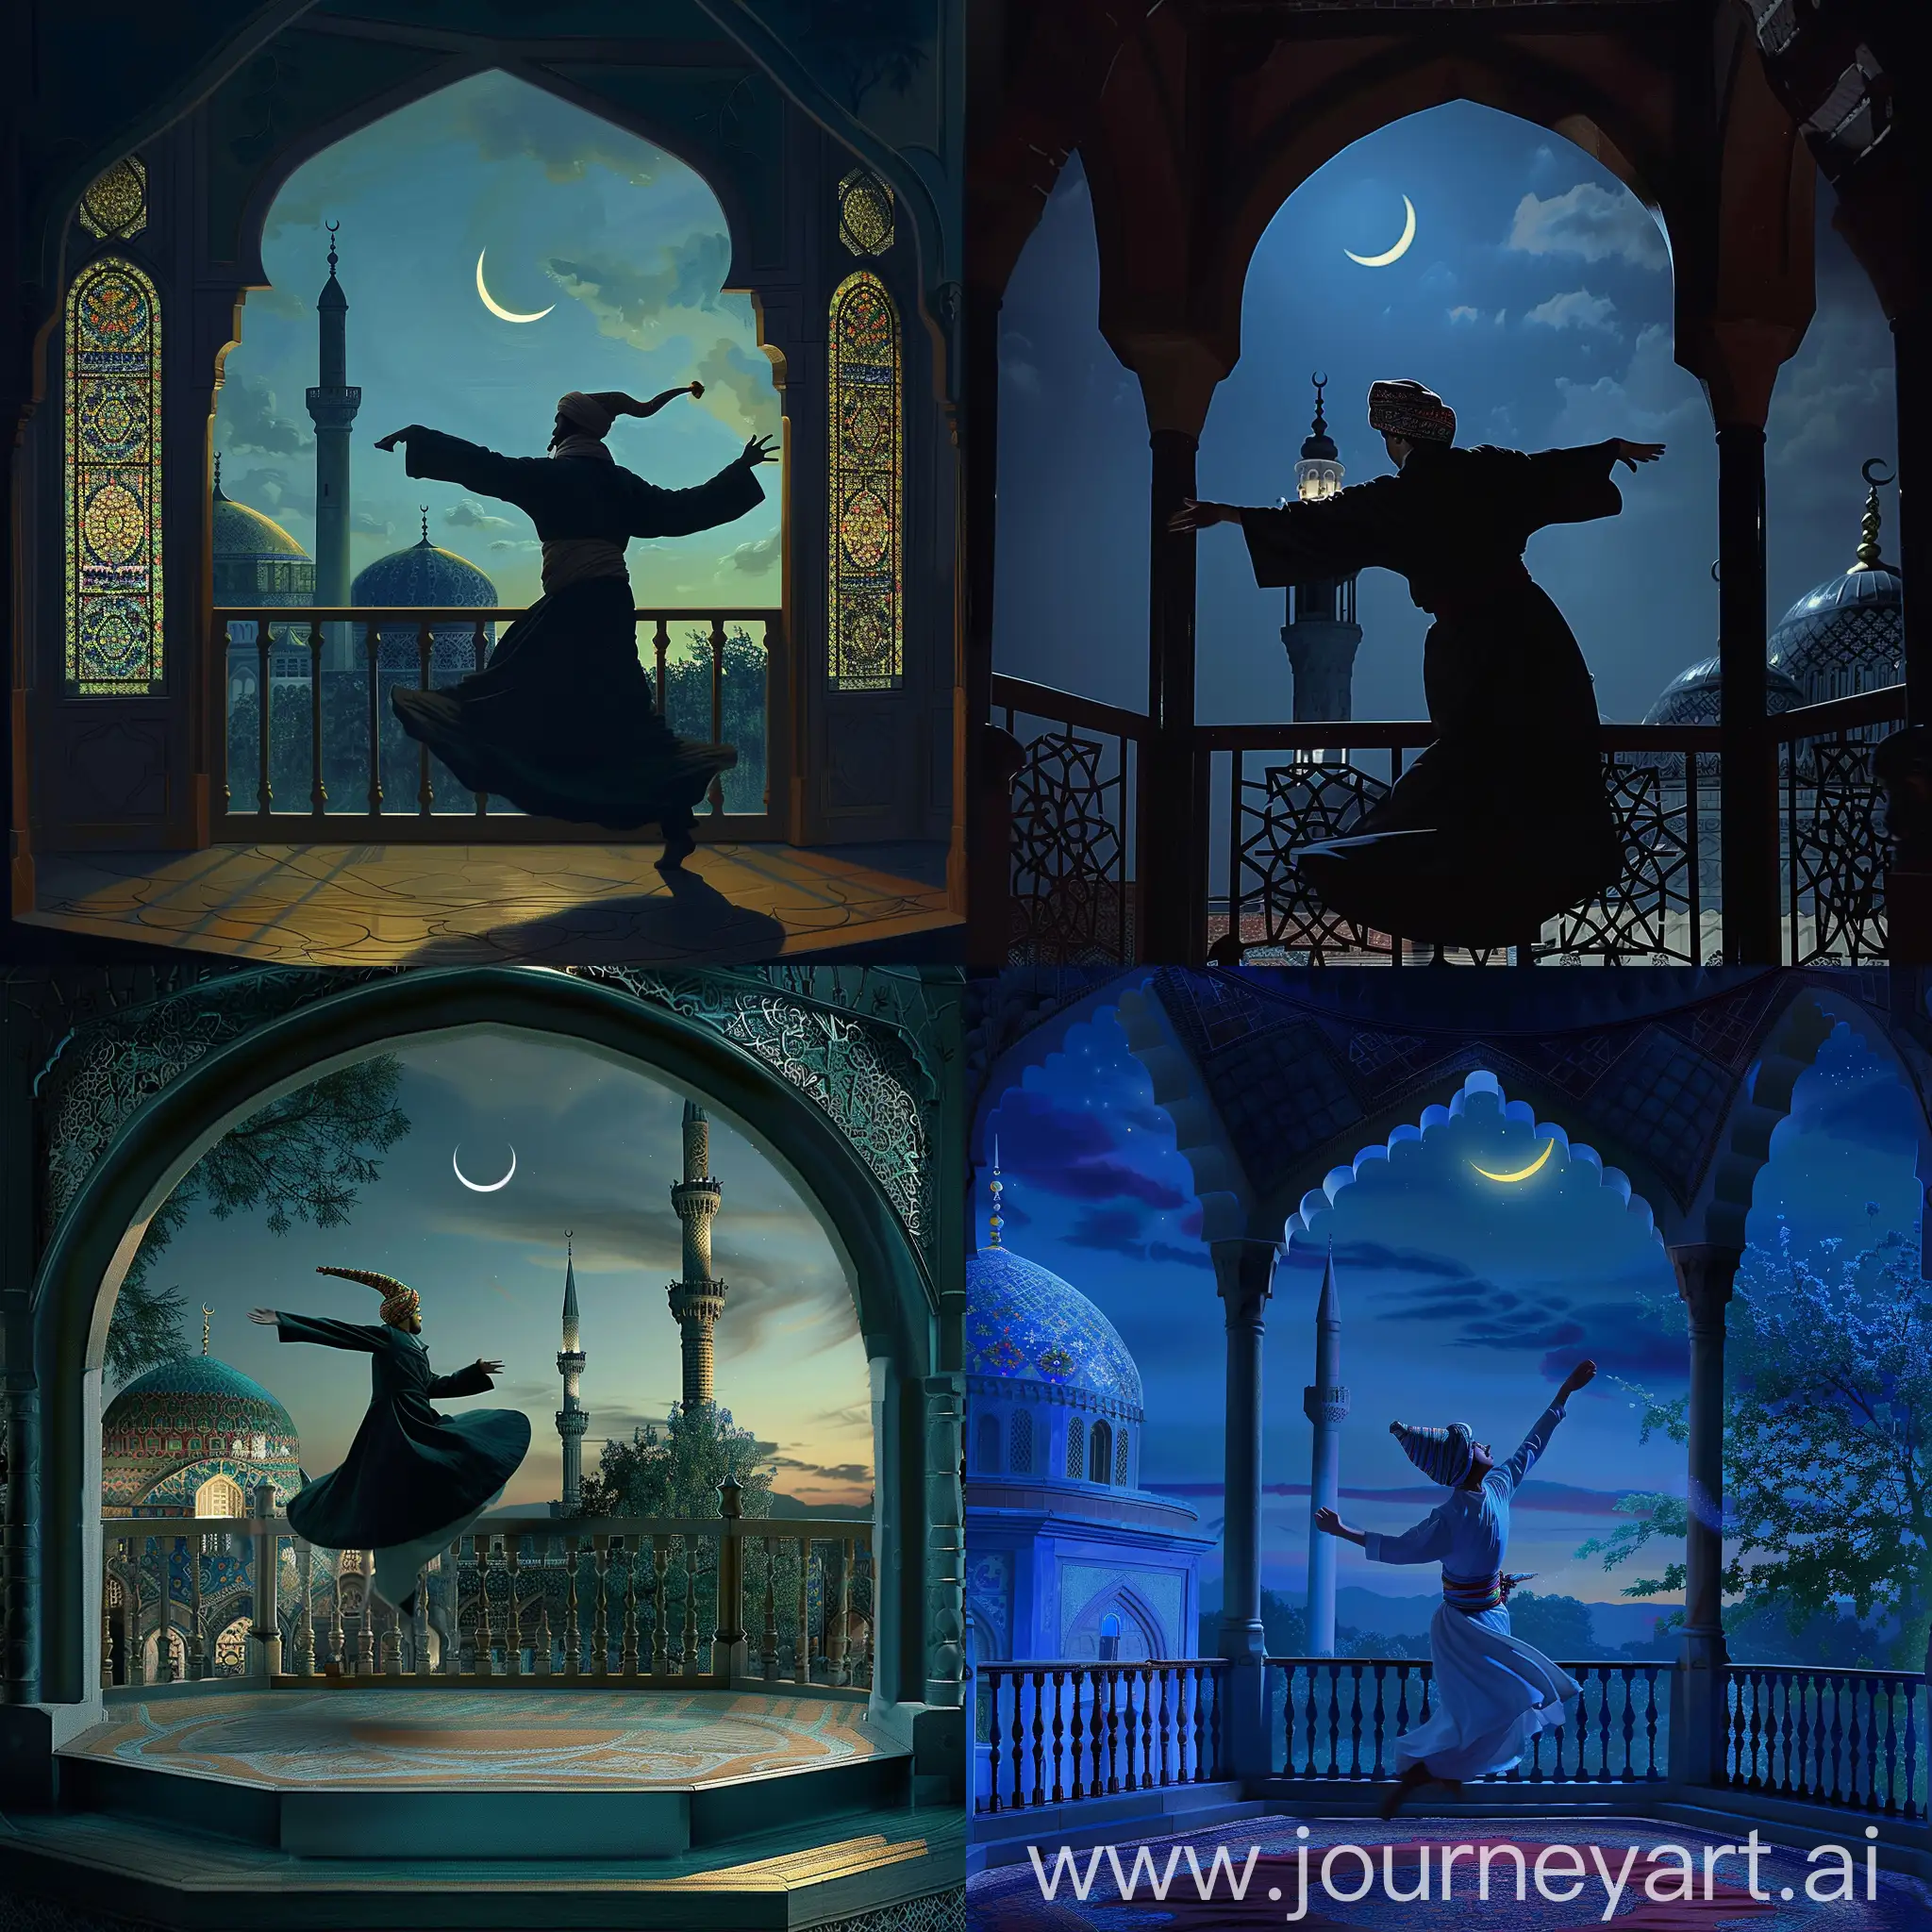 a whirling dervish wearing fez cap performing sufi whirling, inside an octagonal balcony, calm and serene night outside with a cresent moon, view of a Persian tiled mosque dome and minaret --sref https://cdn.discordapp.com/attachments/1213041174428782623/1223222044104069191/IMG_20240326_220808.png?ex=665a538d&is=6659020d&hm=d45885ffdd7ce718afec12789f4a333fbfd309e42791b974dd4ba9c9ab9dd5db& --ar 2:3